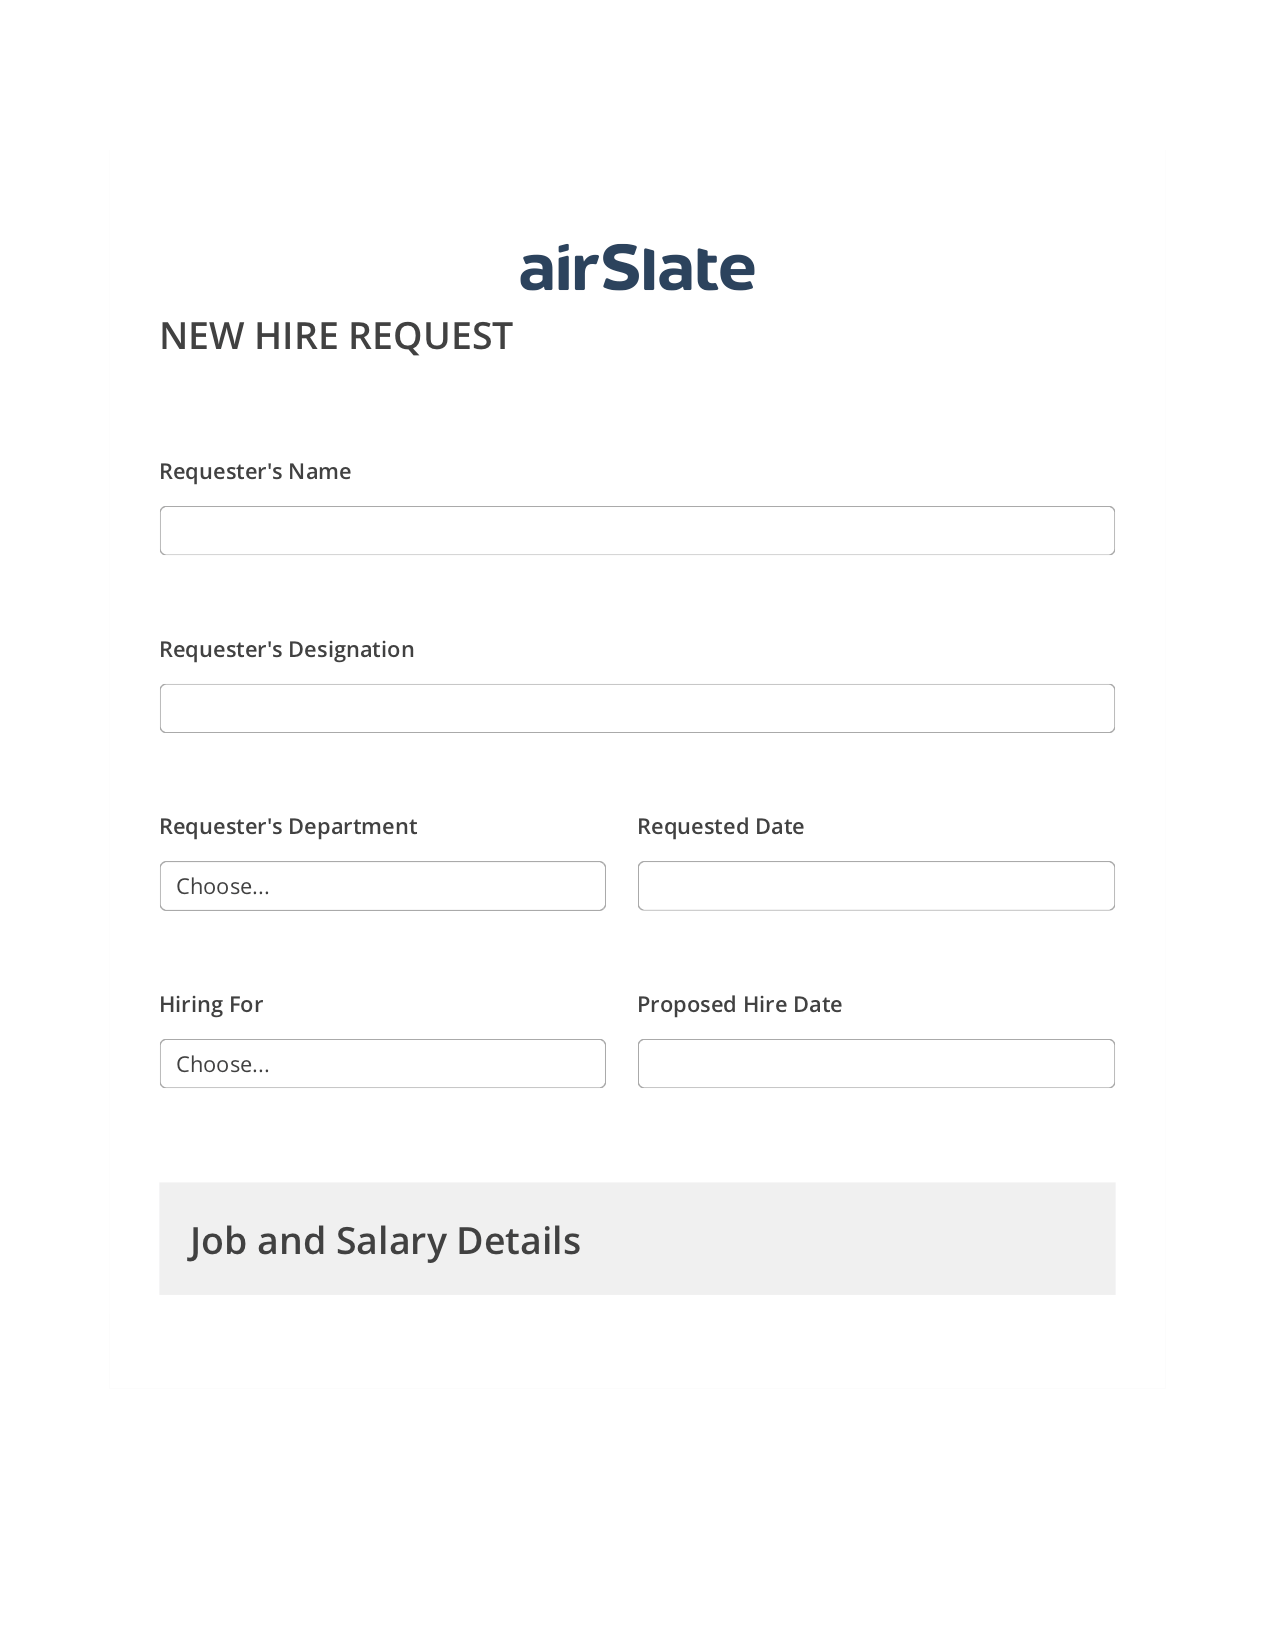 Multirole Hiring Request Workflow Pre-fill from Google Sheets Bot, Remove Tags From Slate Bot, Archive to Google Drive Bot